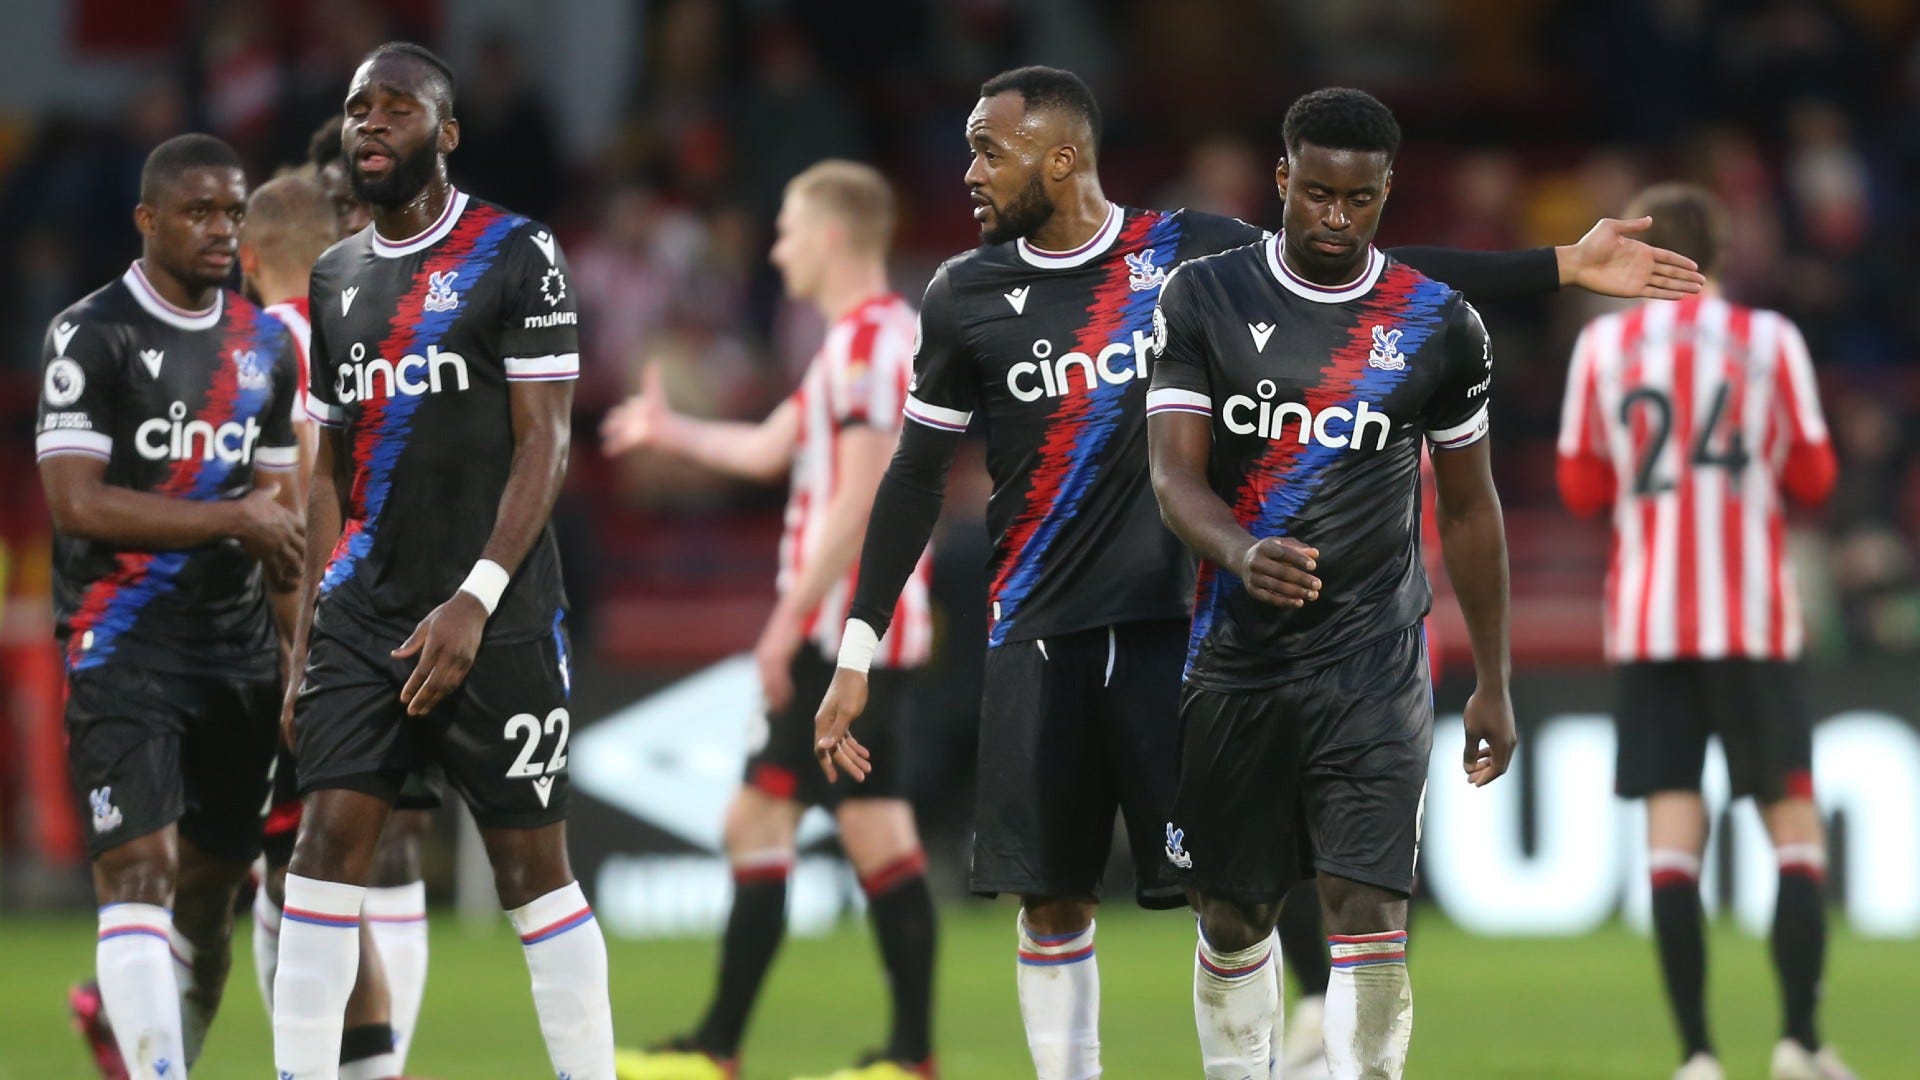 Crystal Palace vs Leicester Where to watch the match online, live stream, TV channels and kick-off time Goal